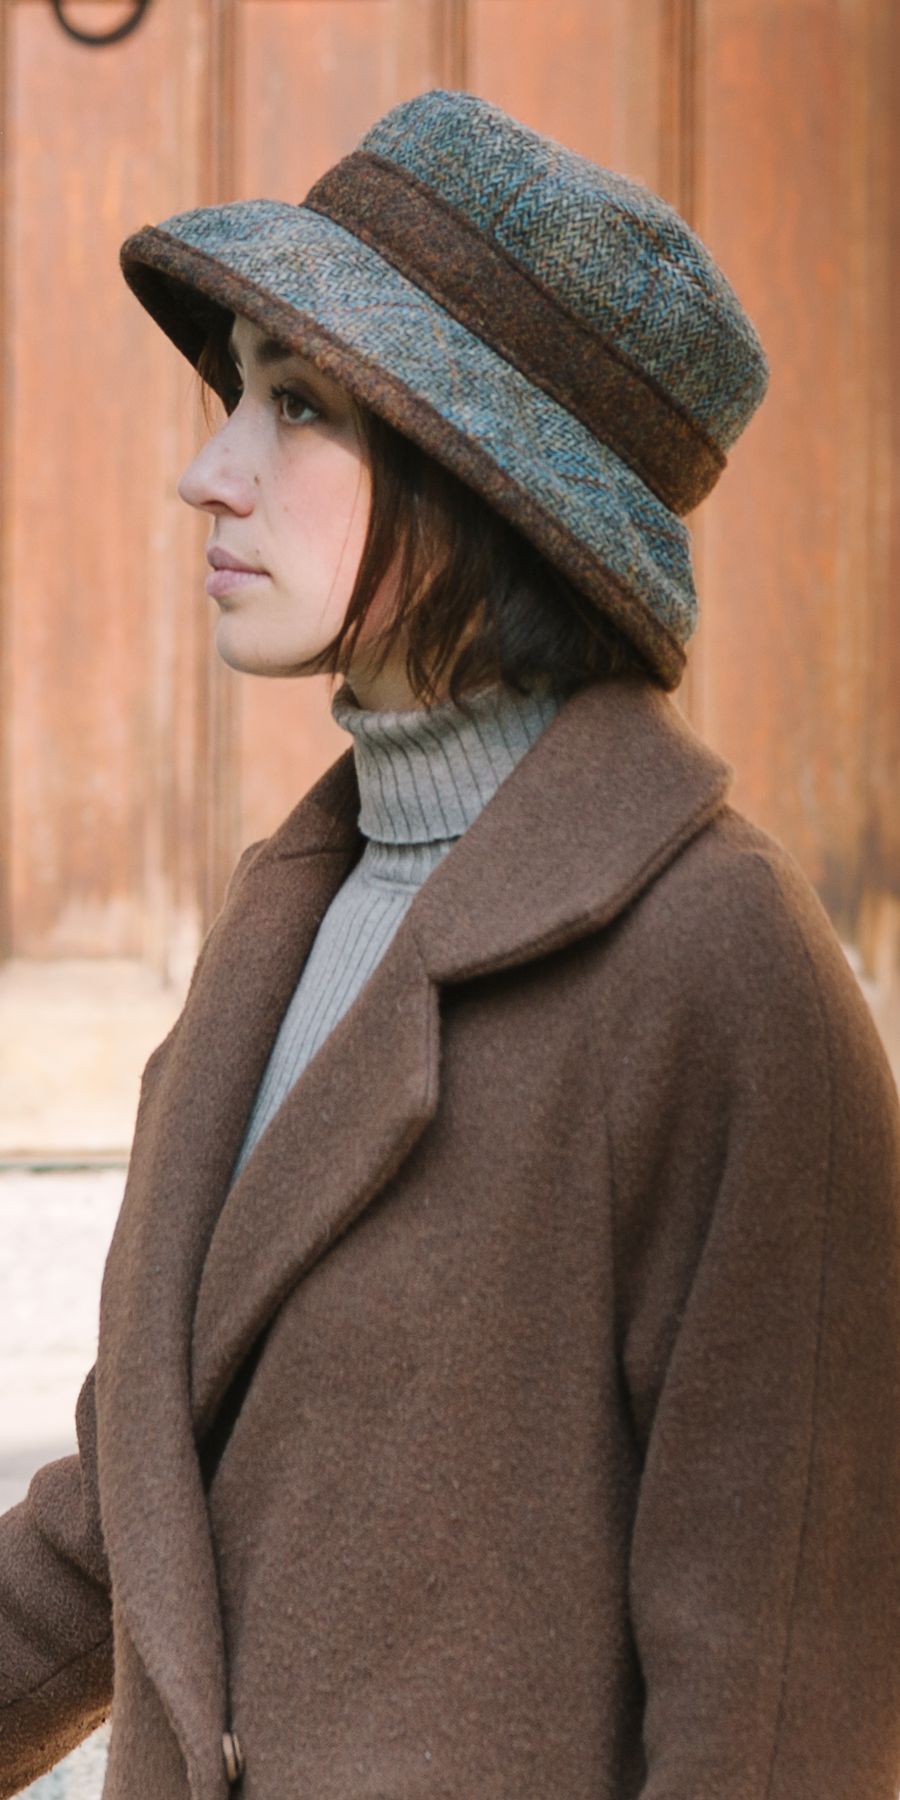 Harris Tweed wool is hand woven in the outer Hebrides of  Scotland. Puffin Gear combines their classic style with this timeless fabric to create hats you'll love for years. Carefully made in the Puffin Gear Toronto Canada studio for over 25 years.